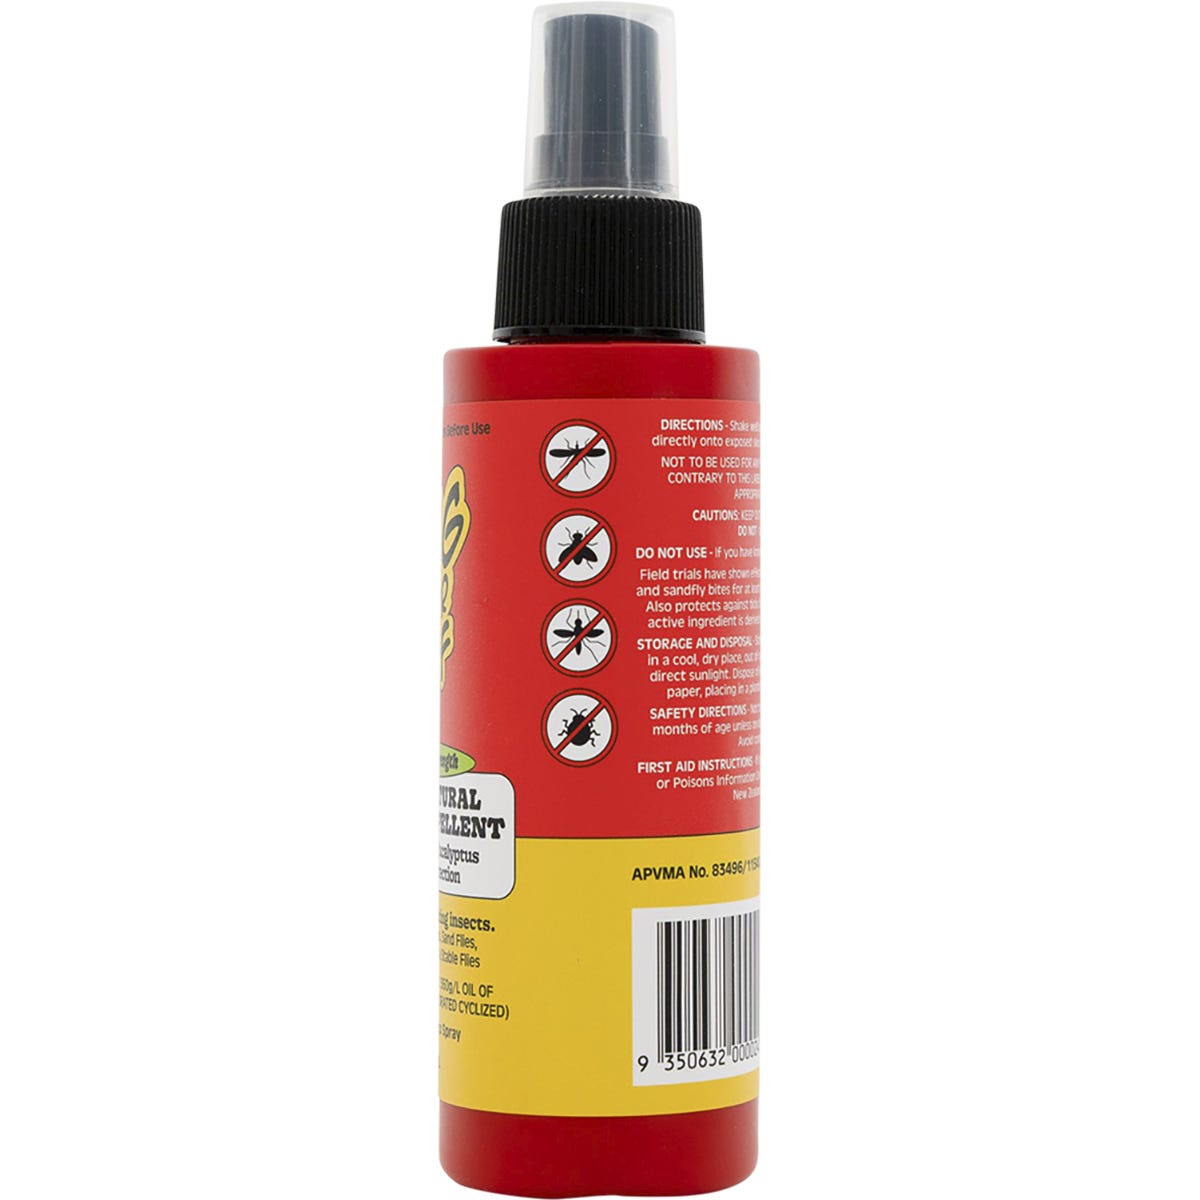 Bug-Grrr Off 100% Natural Insect Repellent Jungle Strength Spray